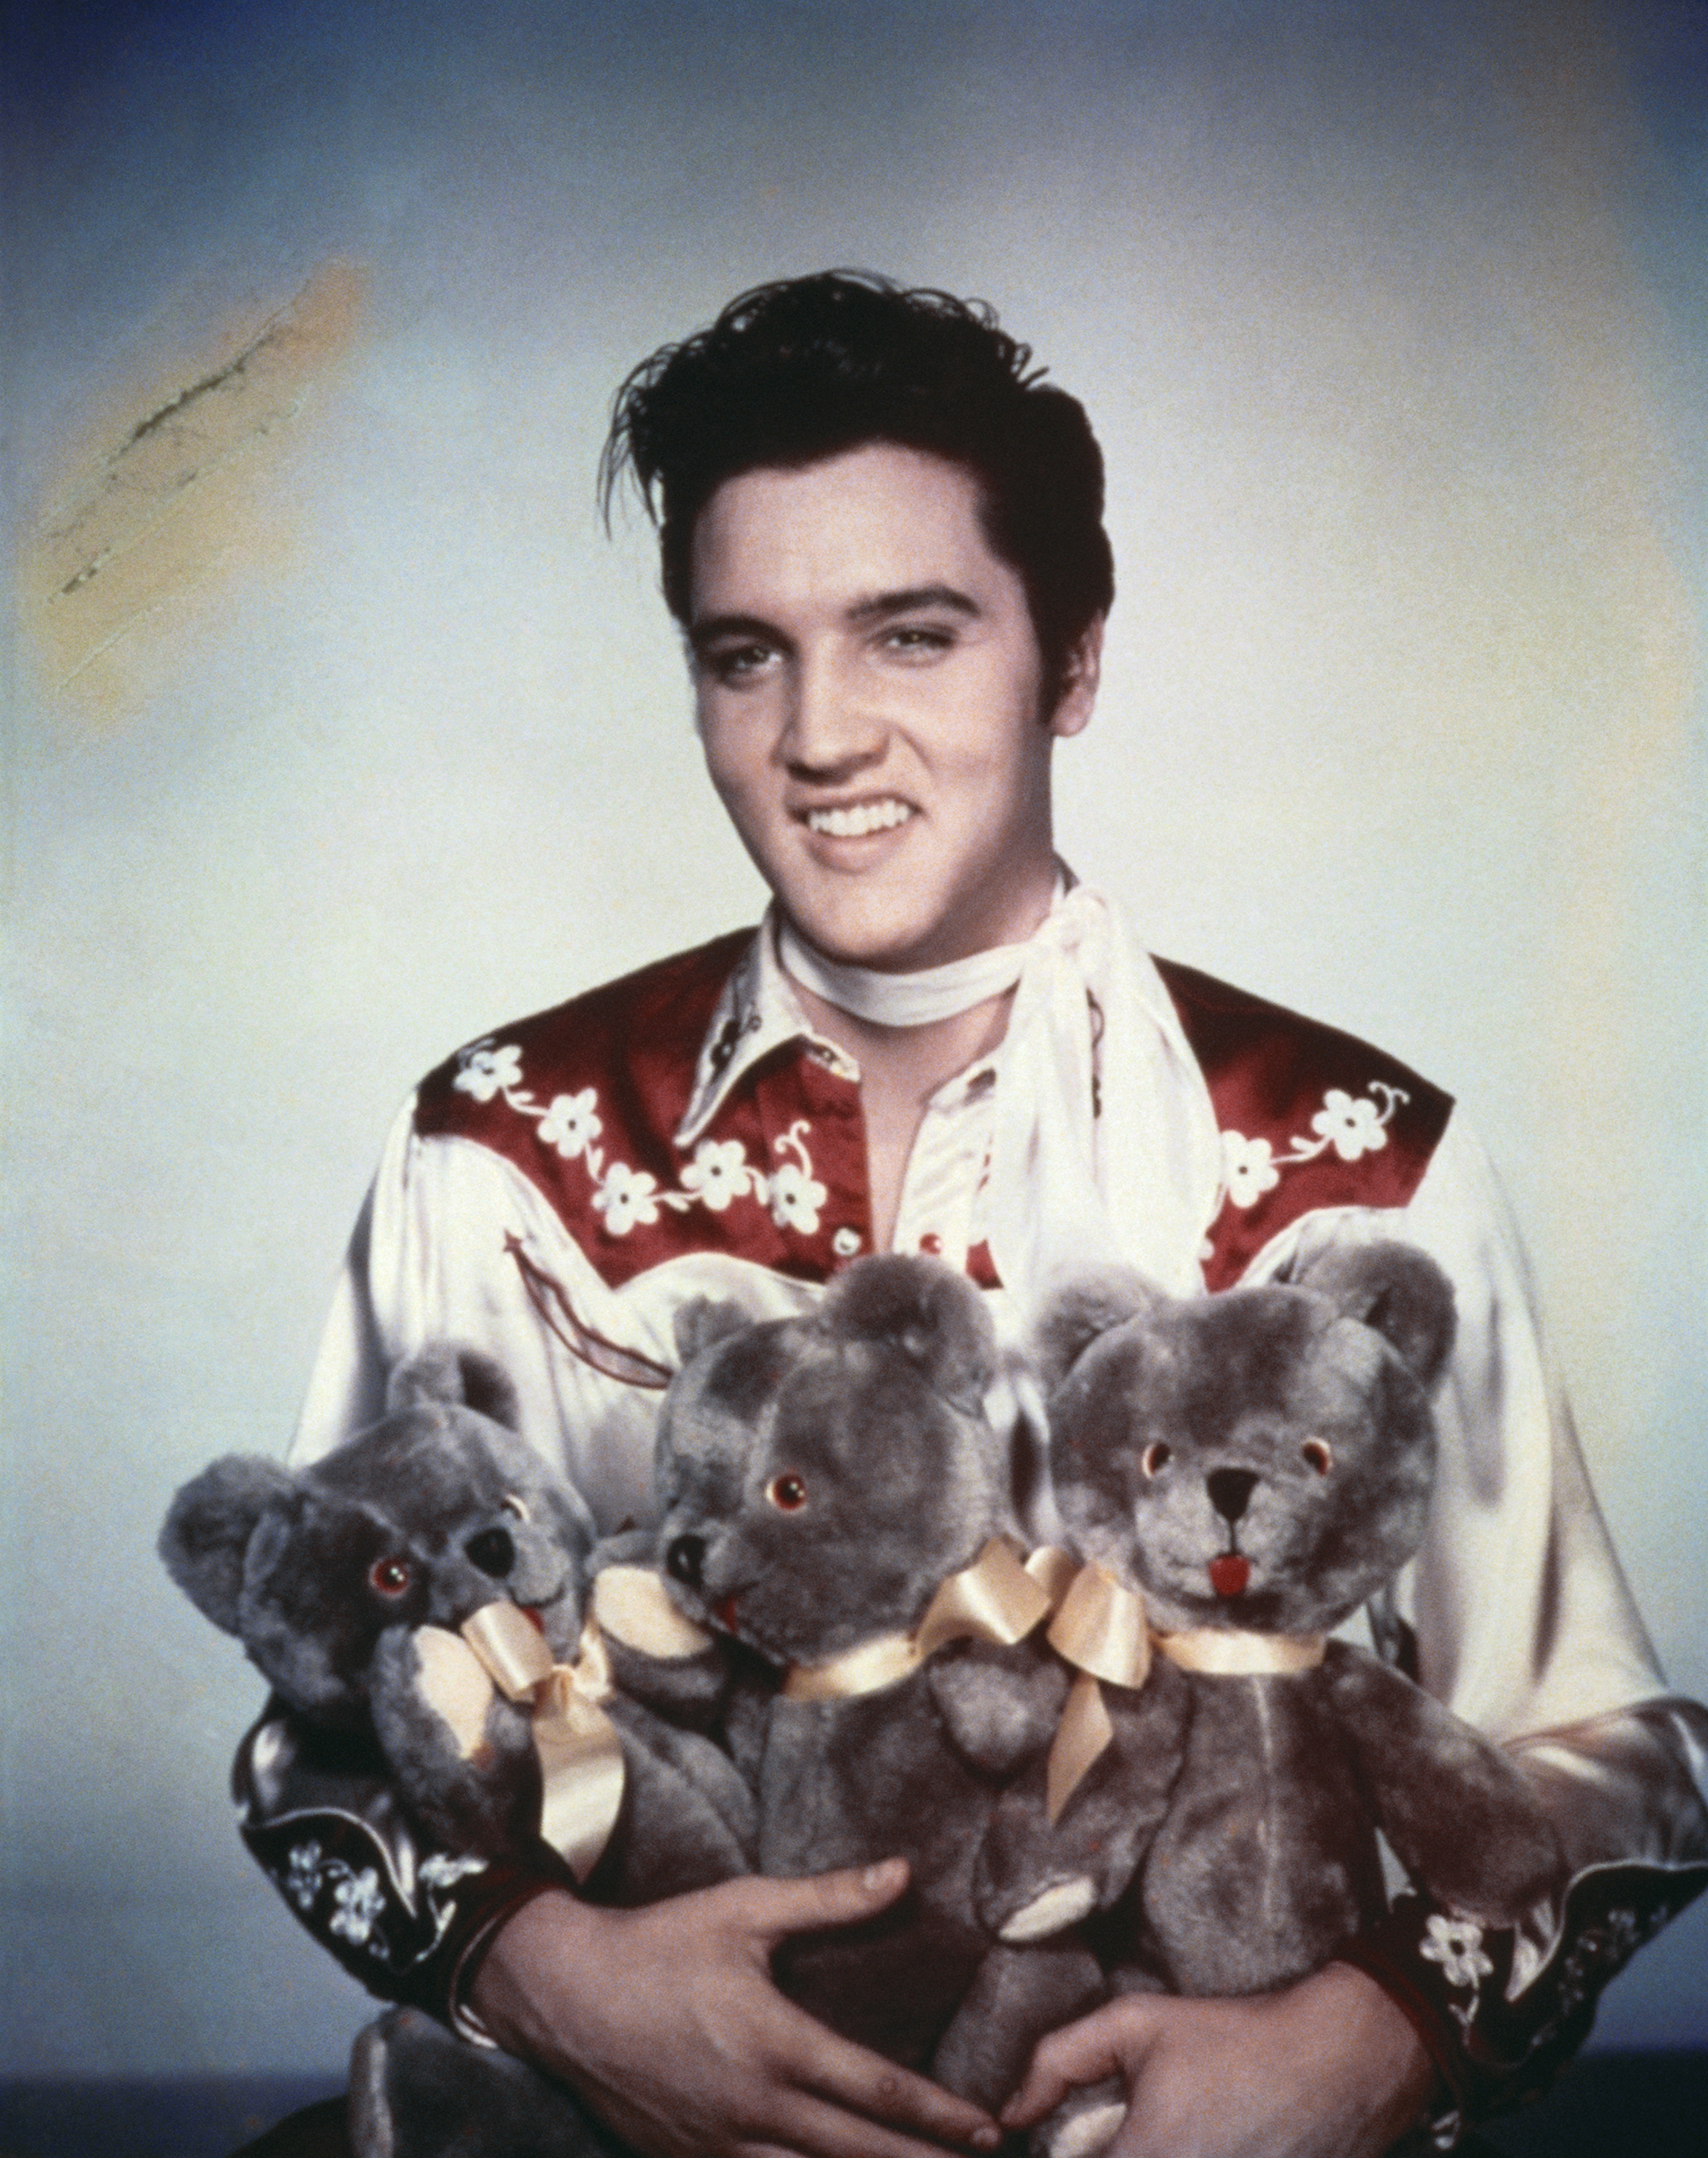 "Loving You"1957, Elvis poses for a portrait to publicize his movie.